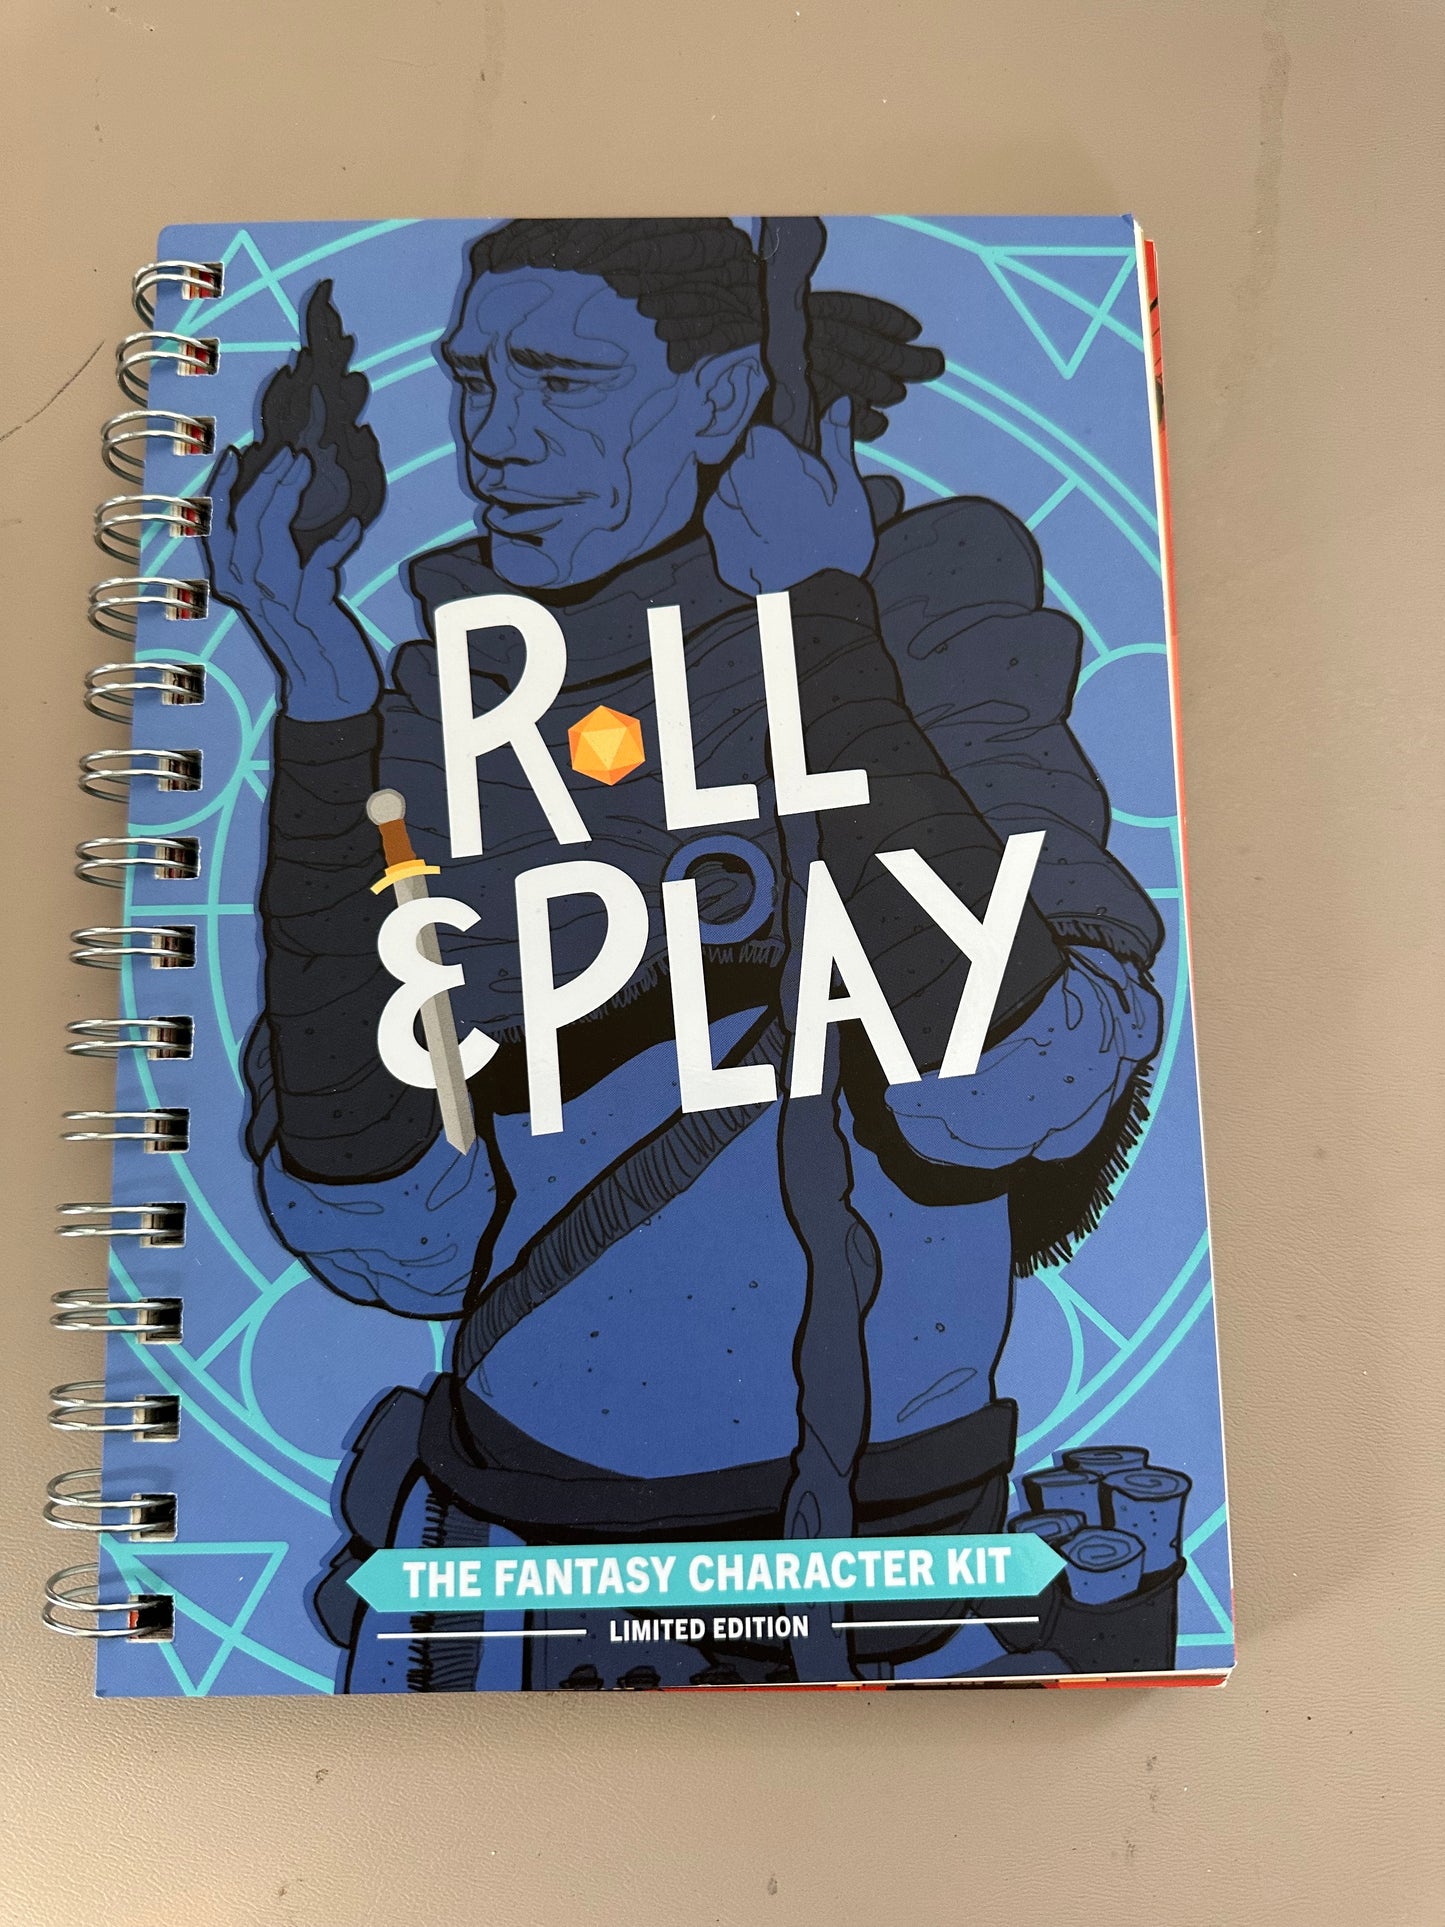 The Fantasy Character Kit Limited Edition by Roll and Play Press